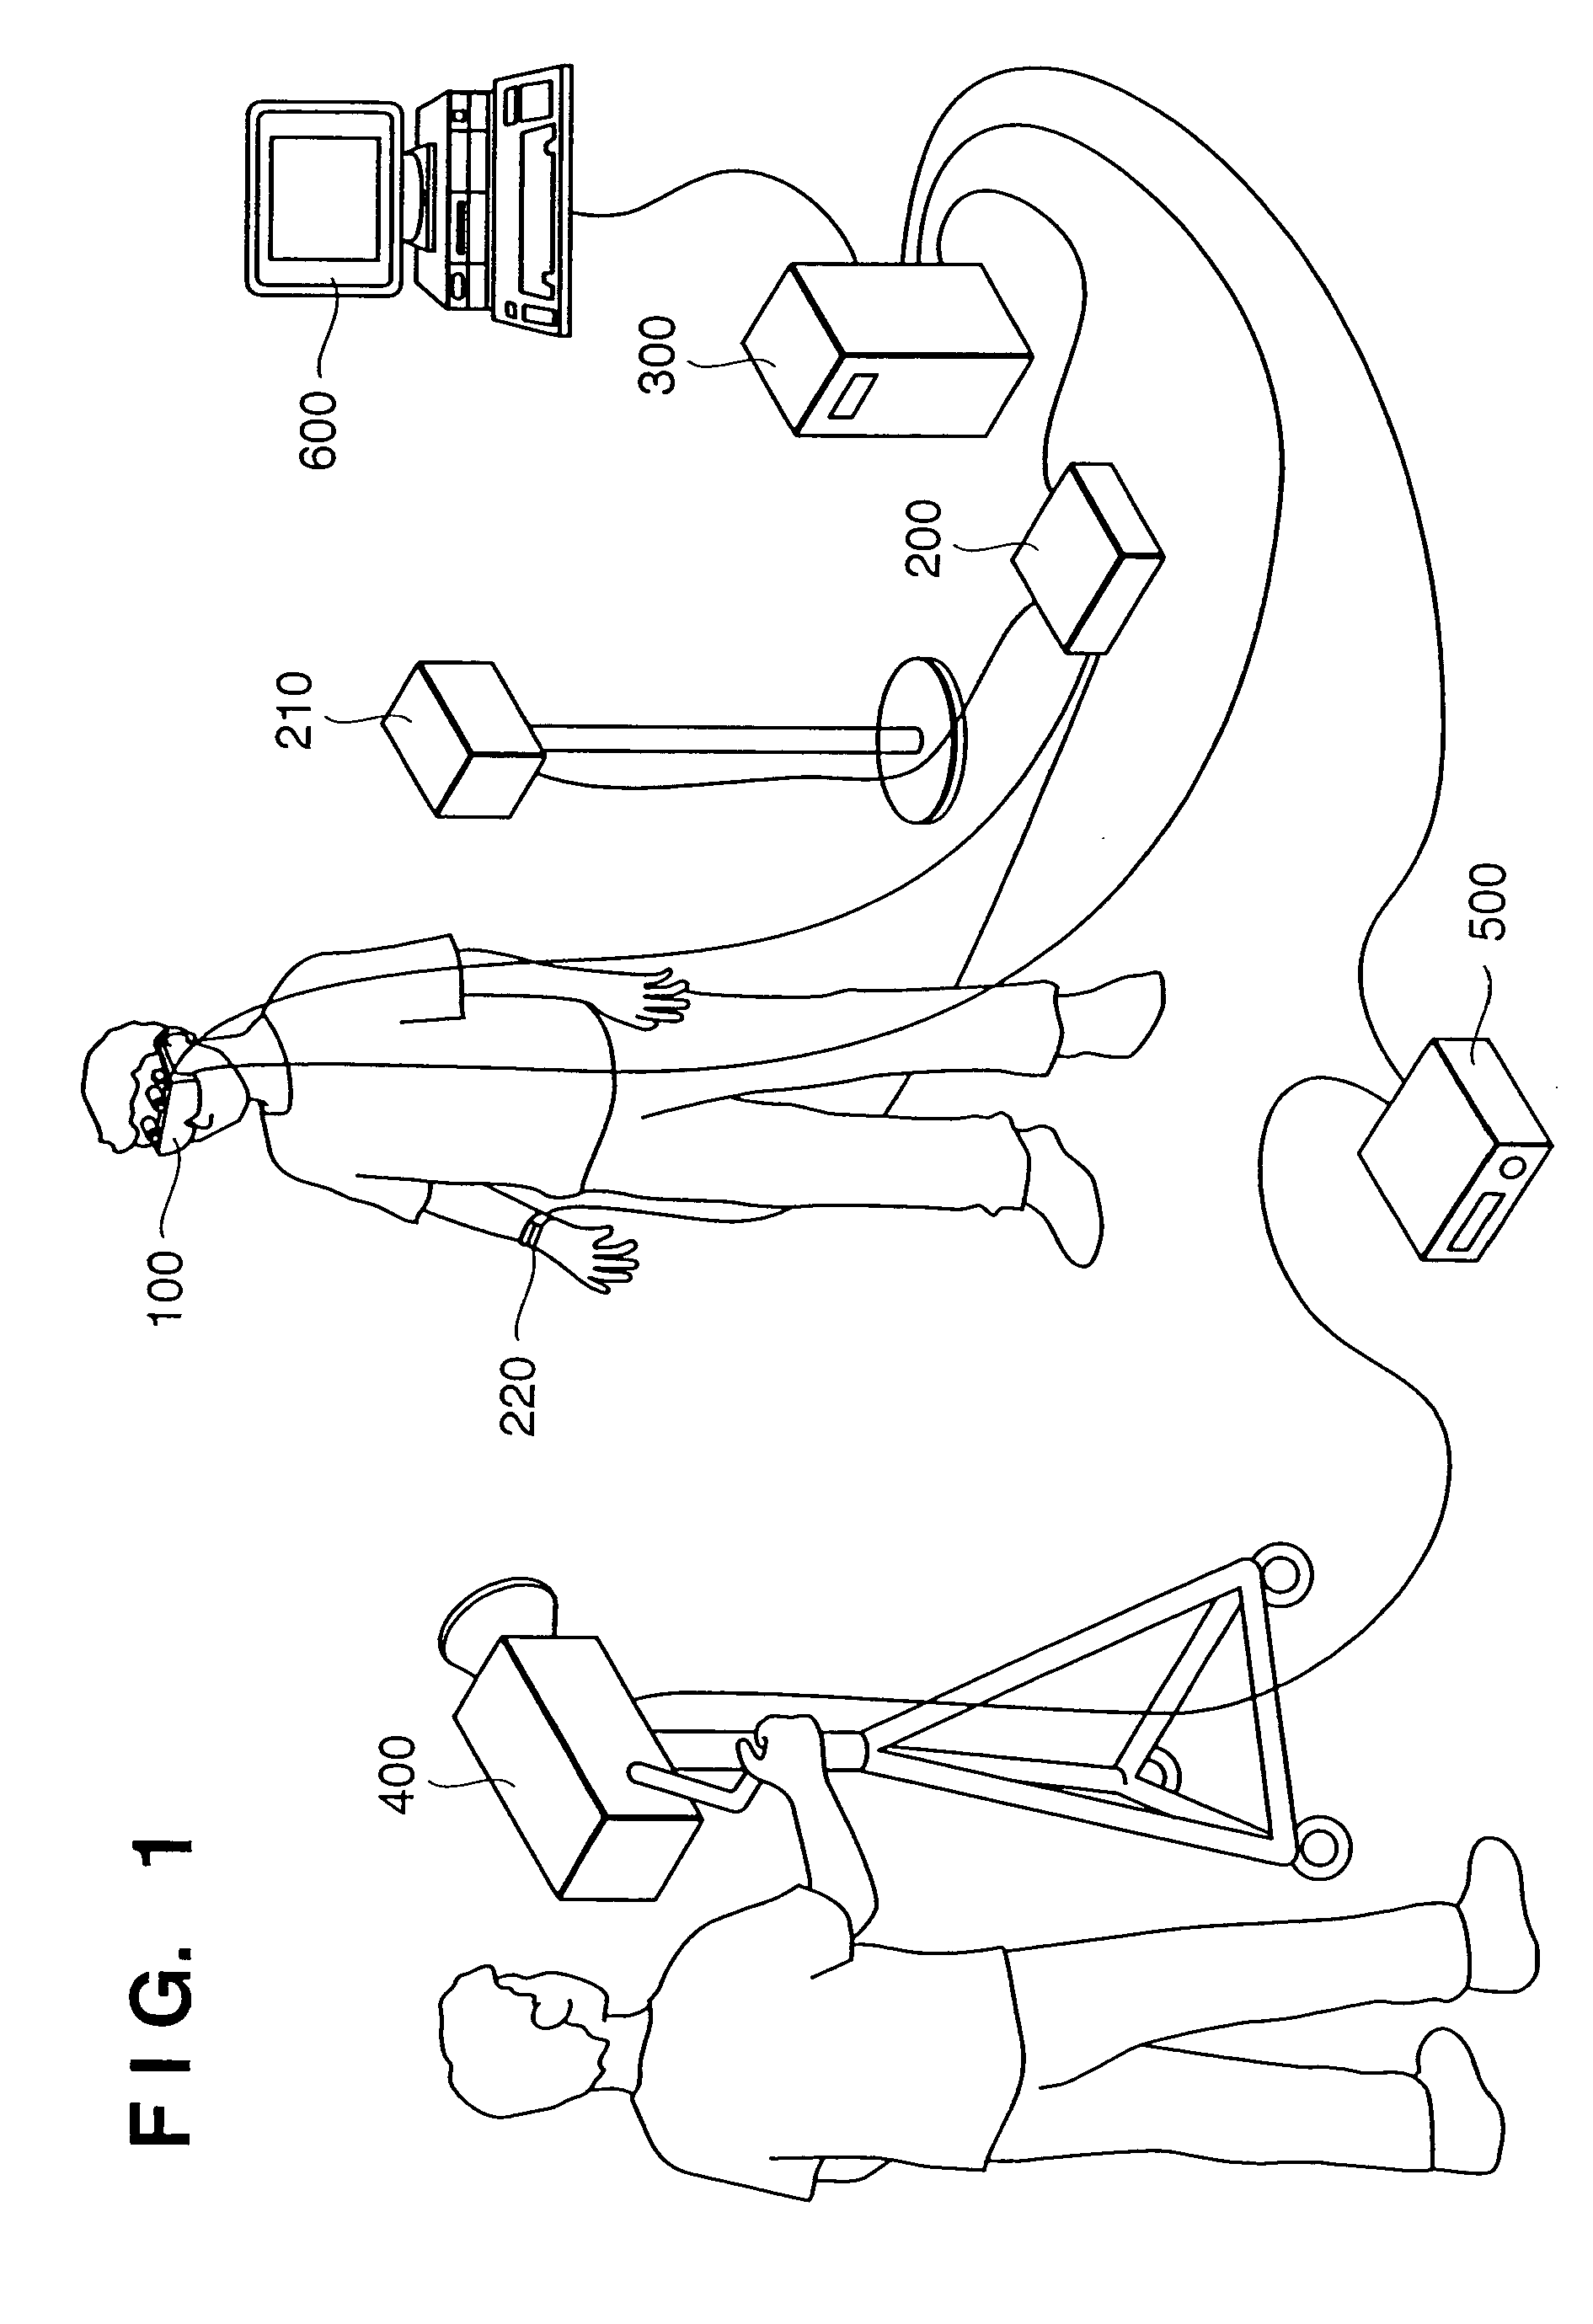 Image composition apparatus and method